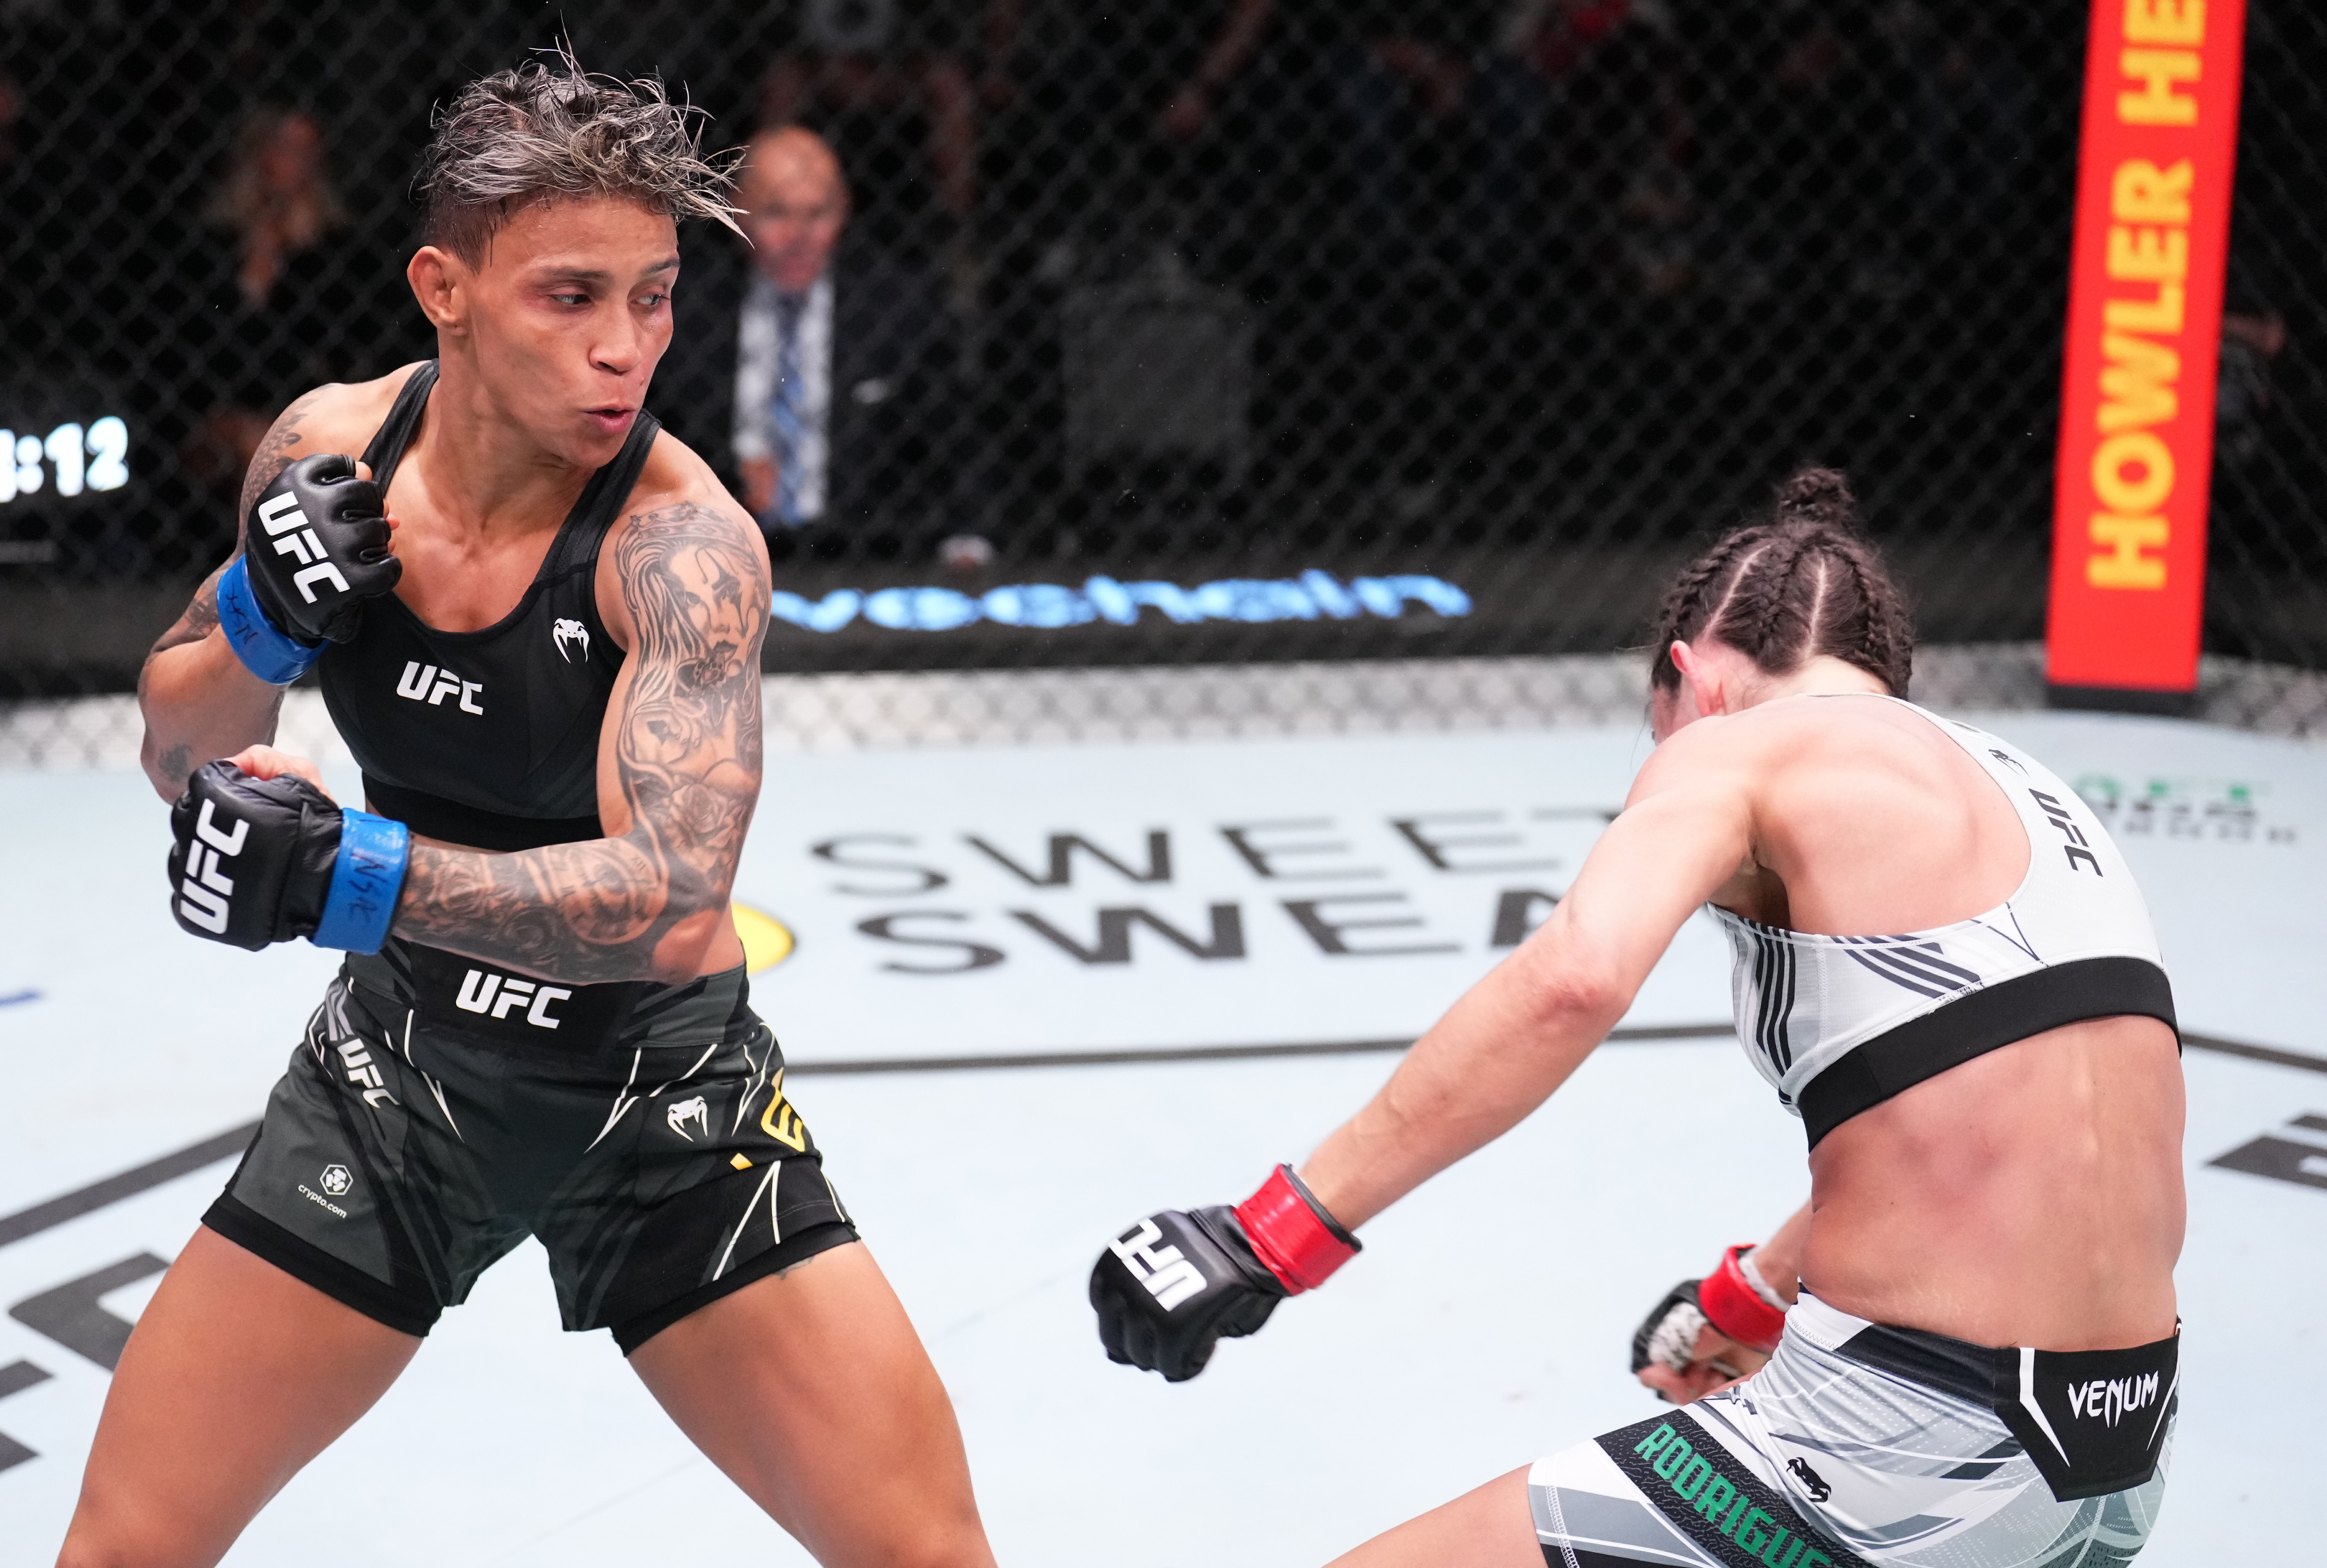 Amanda Lemos unloaded on Marina Rodriguez to get a standing TKO in the UFC Vegas 64 main event